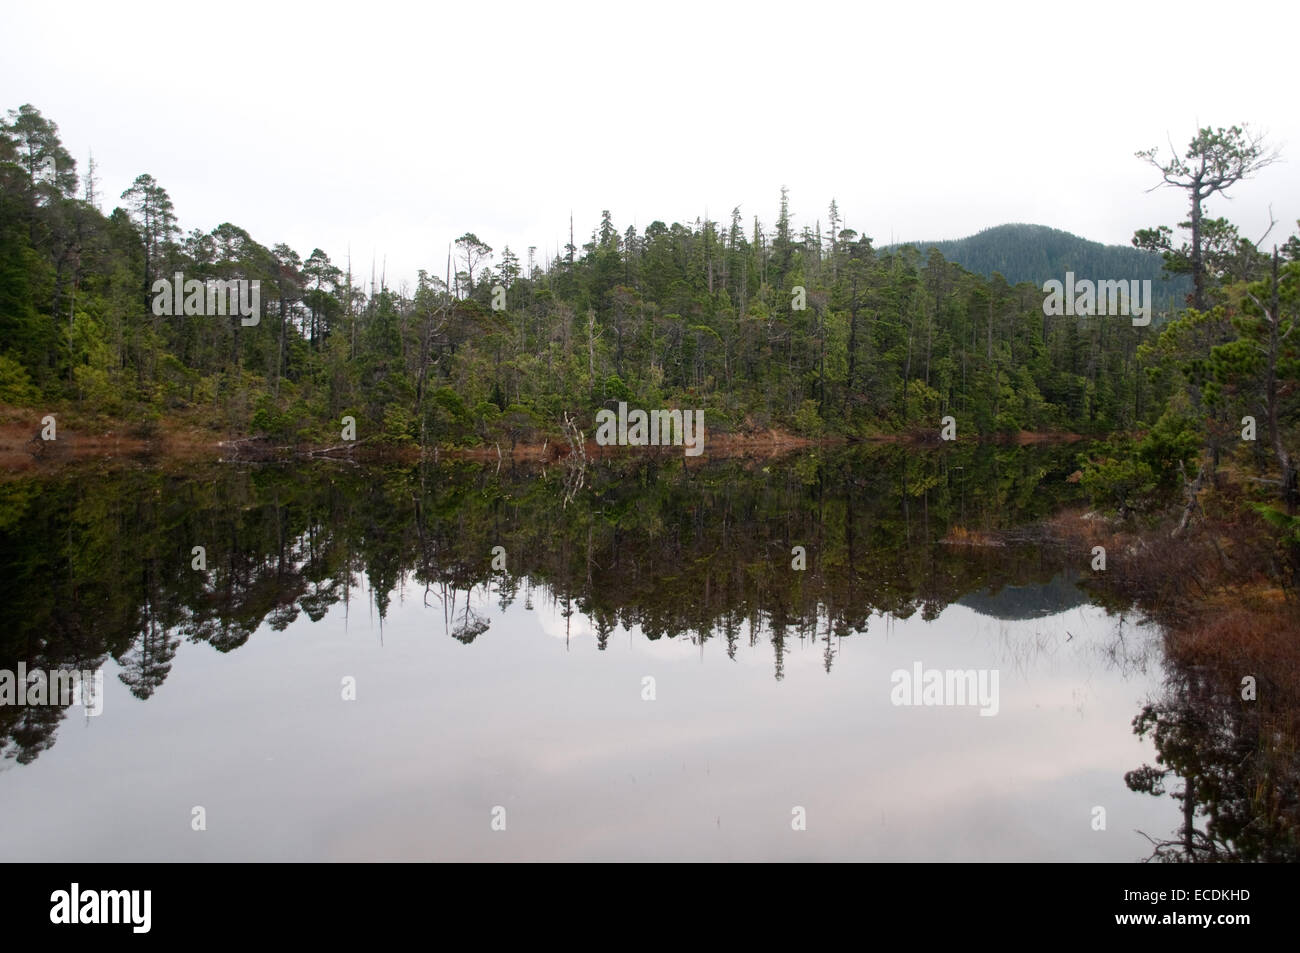 A coniferous / shorepine bog forest on Denny Island, in the Great Bear Rainforest of British Columbia, Canada. Stock Photo